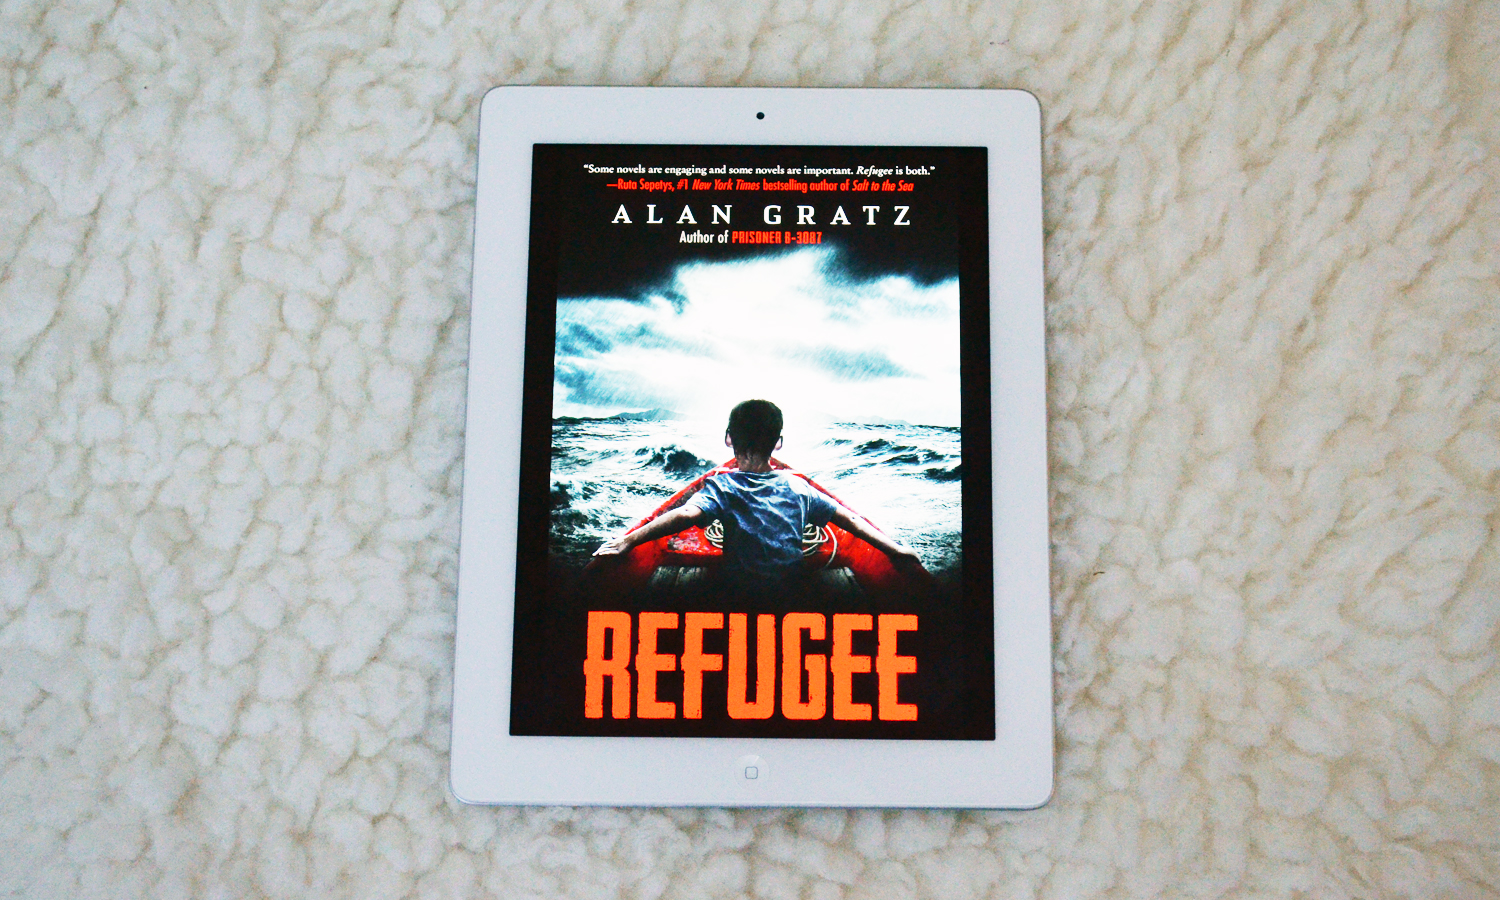 Alan Gratz's newest novel, Refugee, speaks to three generations of children seeking refuge across the world. The book covers cuba, the holocaust and syrian refugees and is absolutely a must read for children and adults alike. 